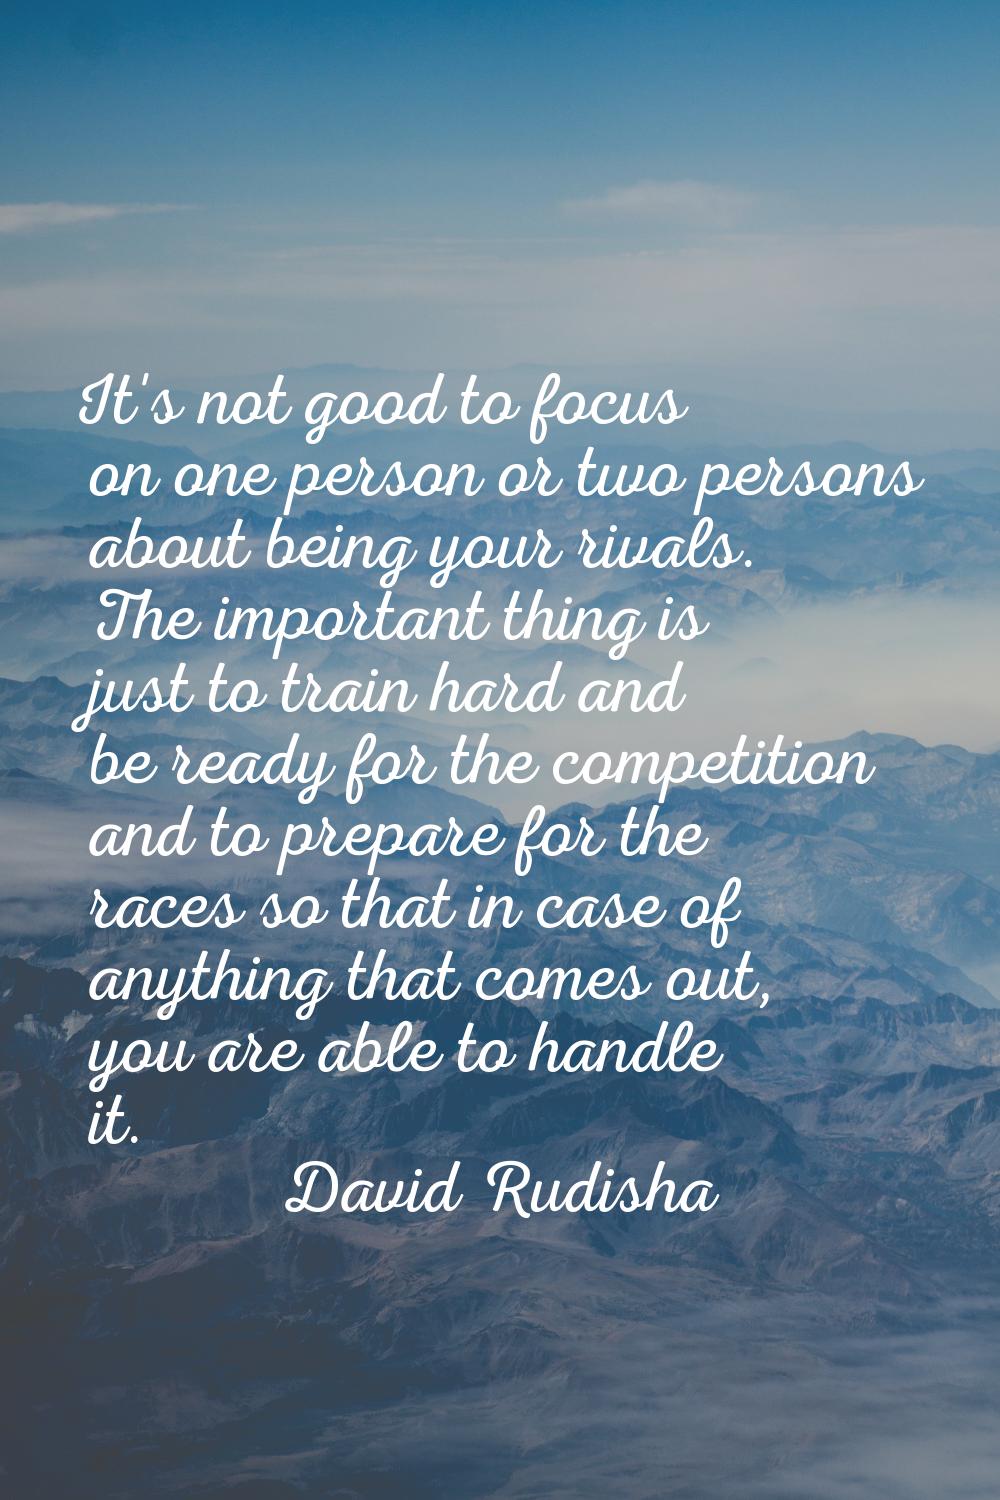 It's not good to focus on one person or two persons about being your rivals. The important thing is